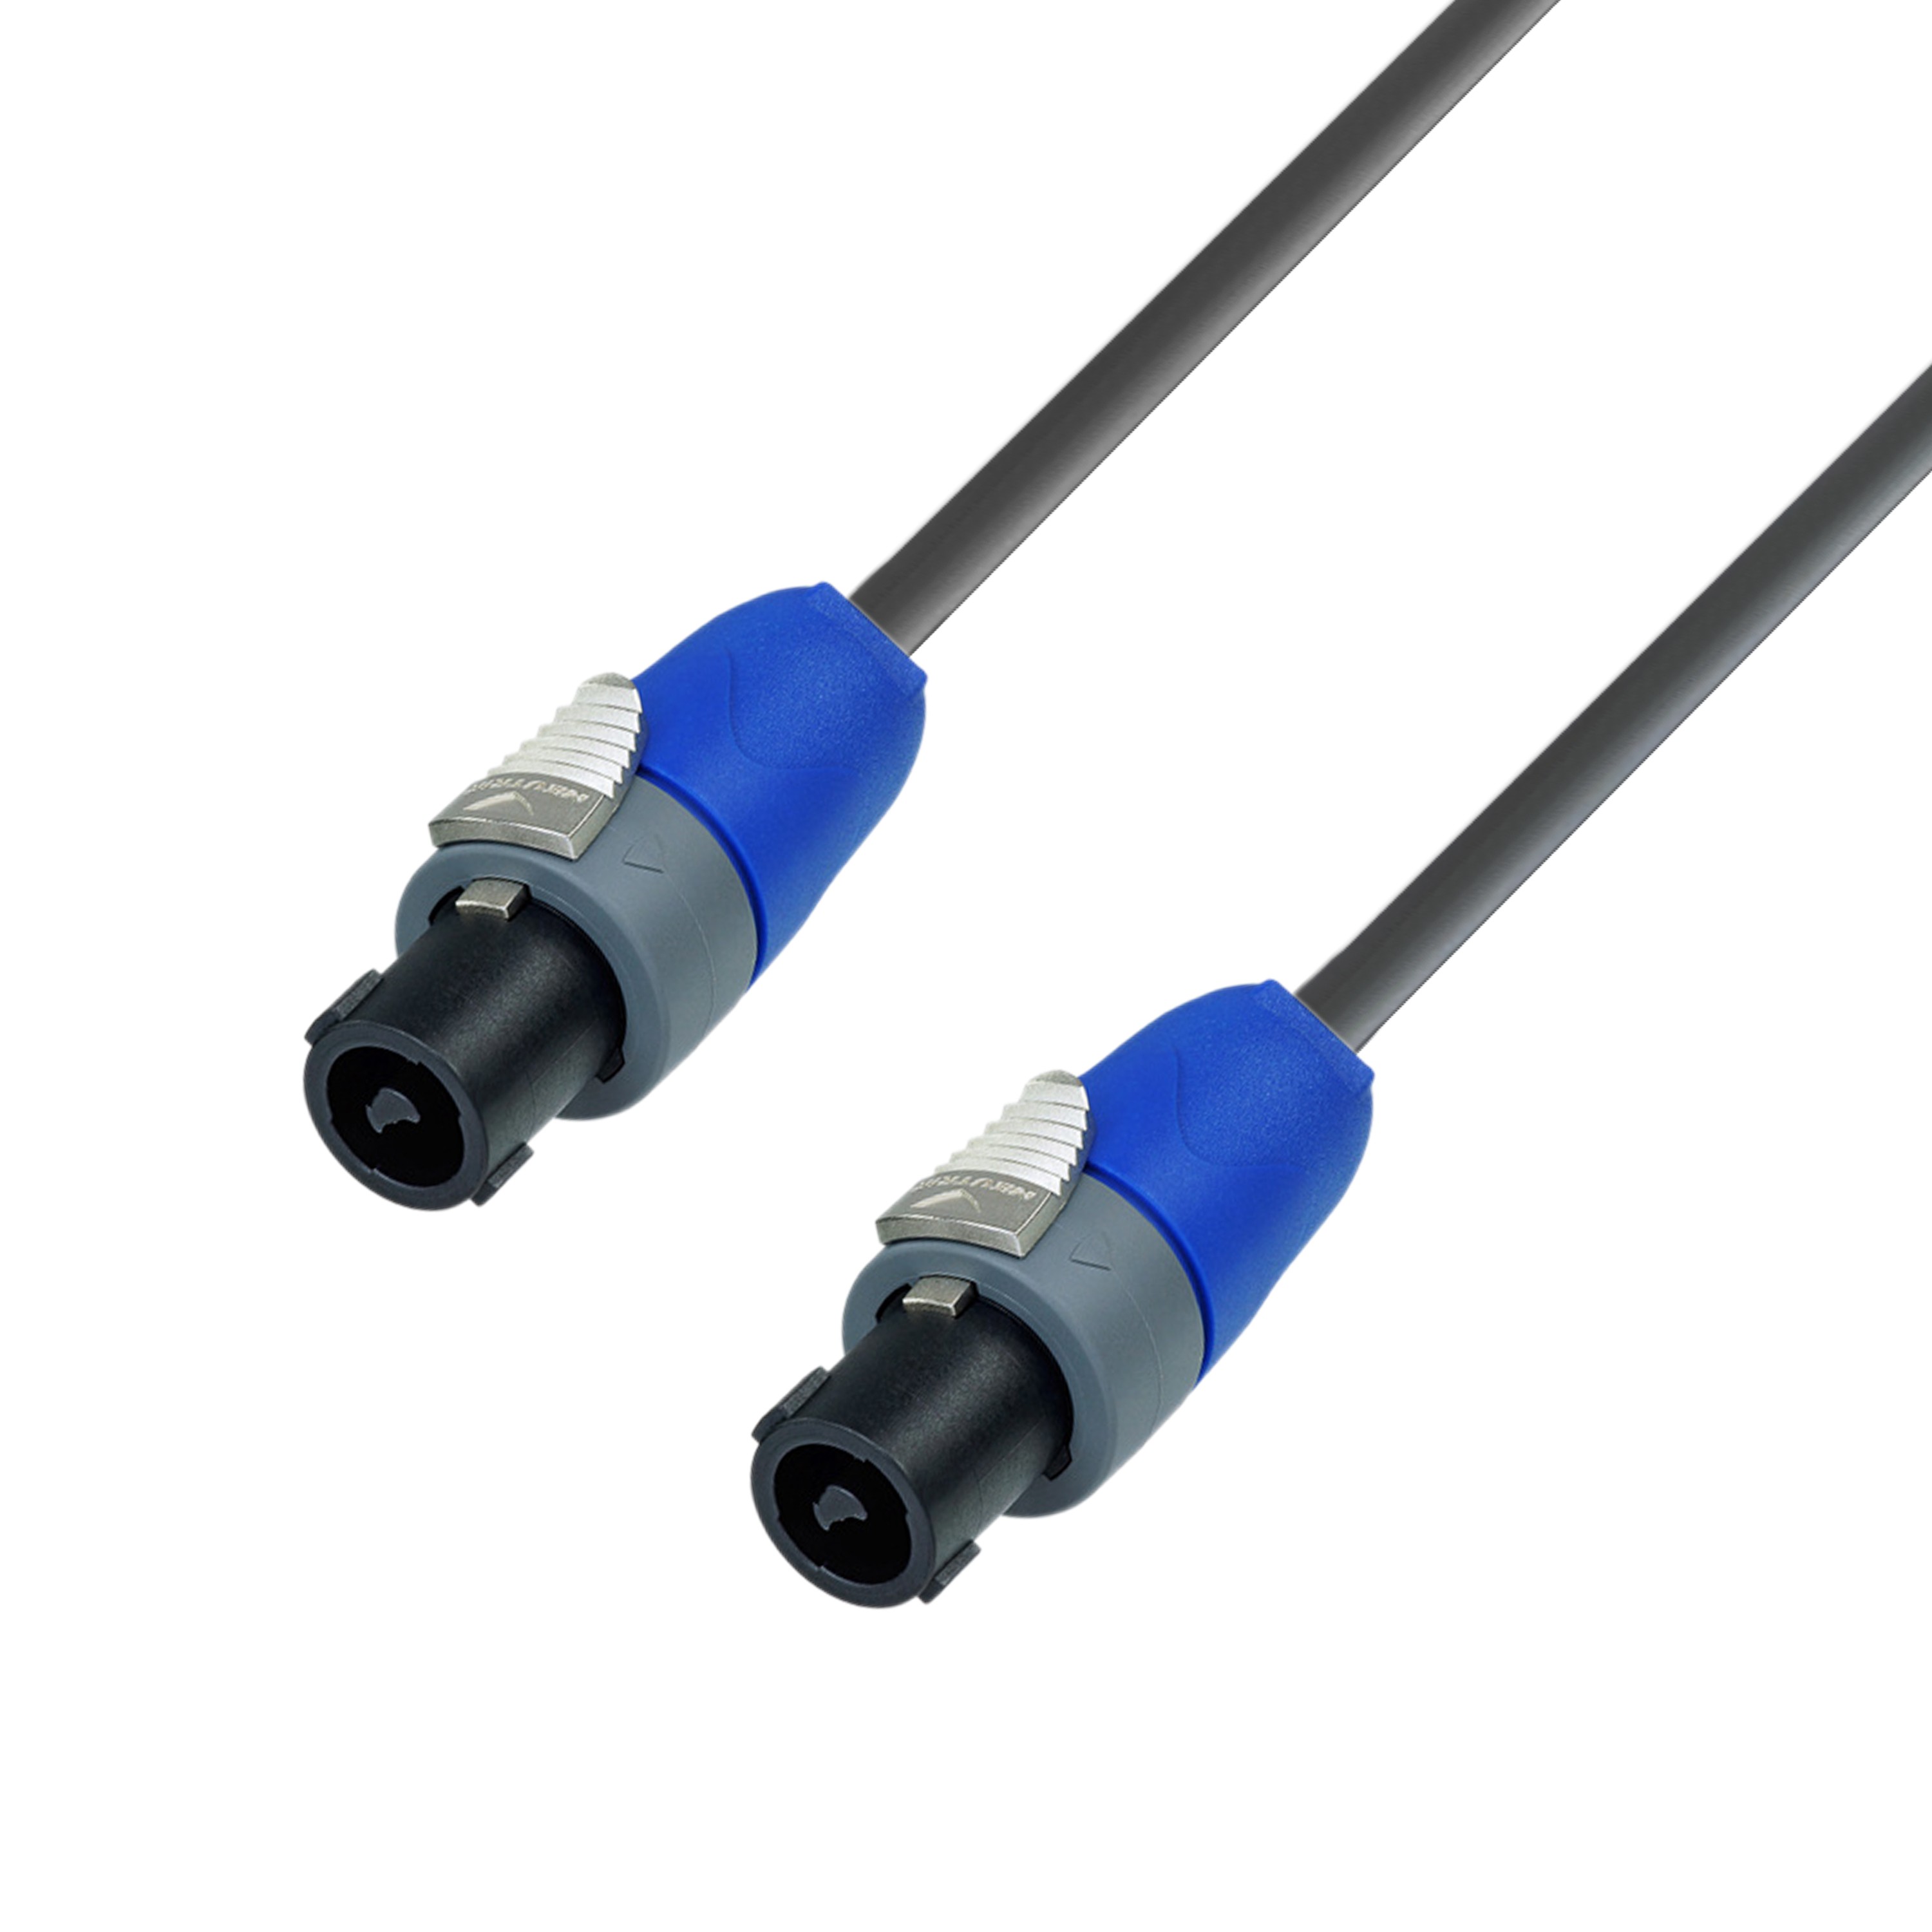 Speakon to Jack Speaker Cable/PA Speaker Lead with Rean Connectors 6m